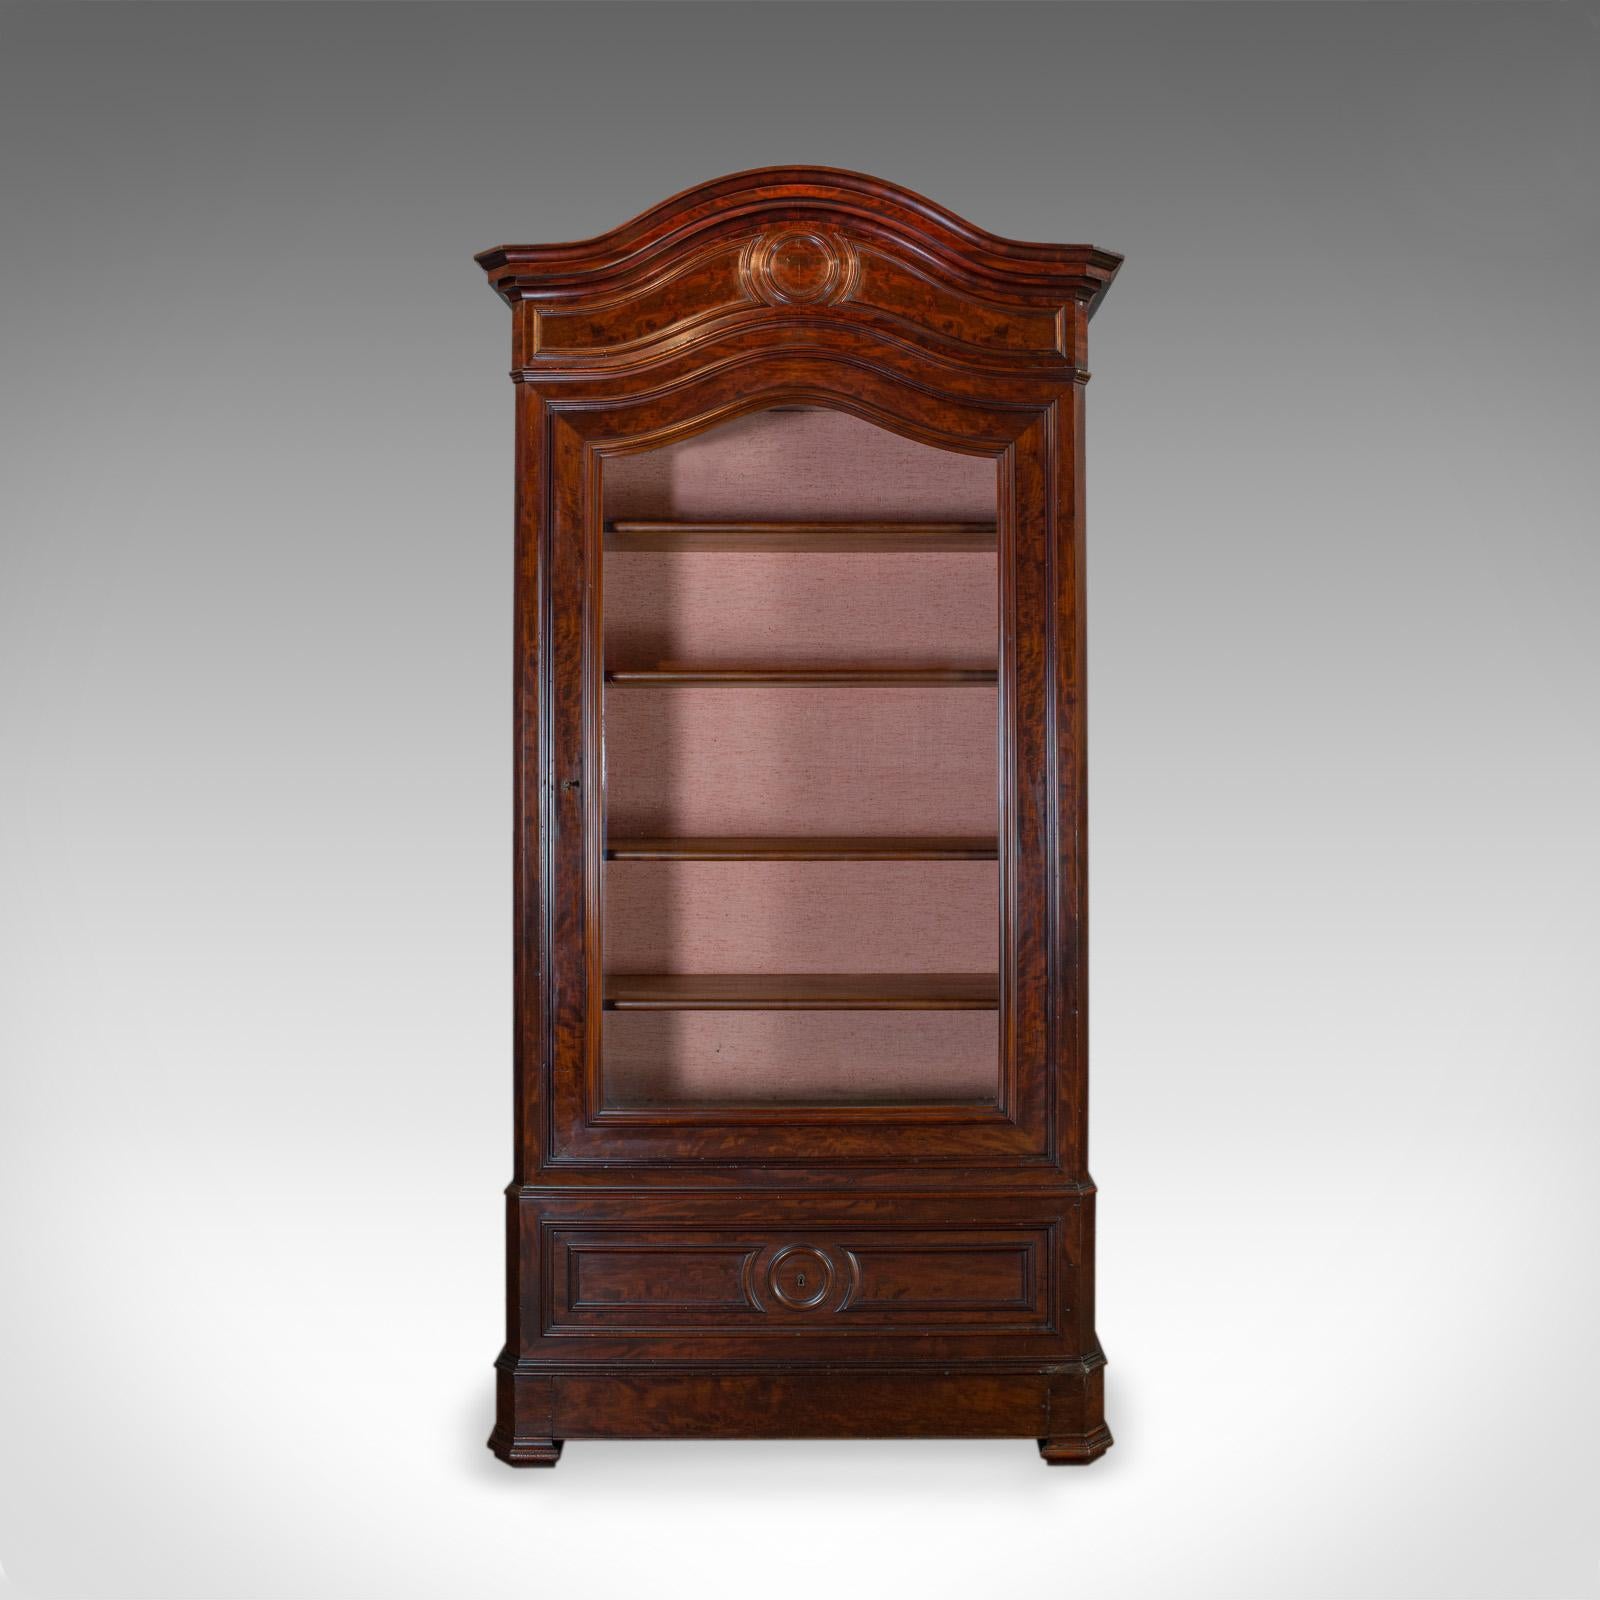 This is an antique display cabinet. An English, Victorian, flame mahogany vitrine dating to the mid-19th century, circa 1850.

Magnificent Victorian vitrine
Deep russet tones to the select flame mahogany
Grain interest and a desirable aged